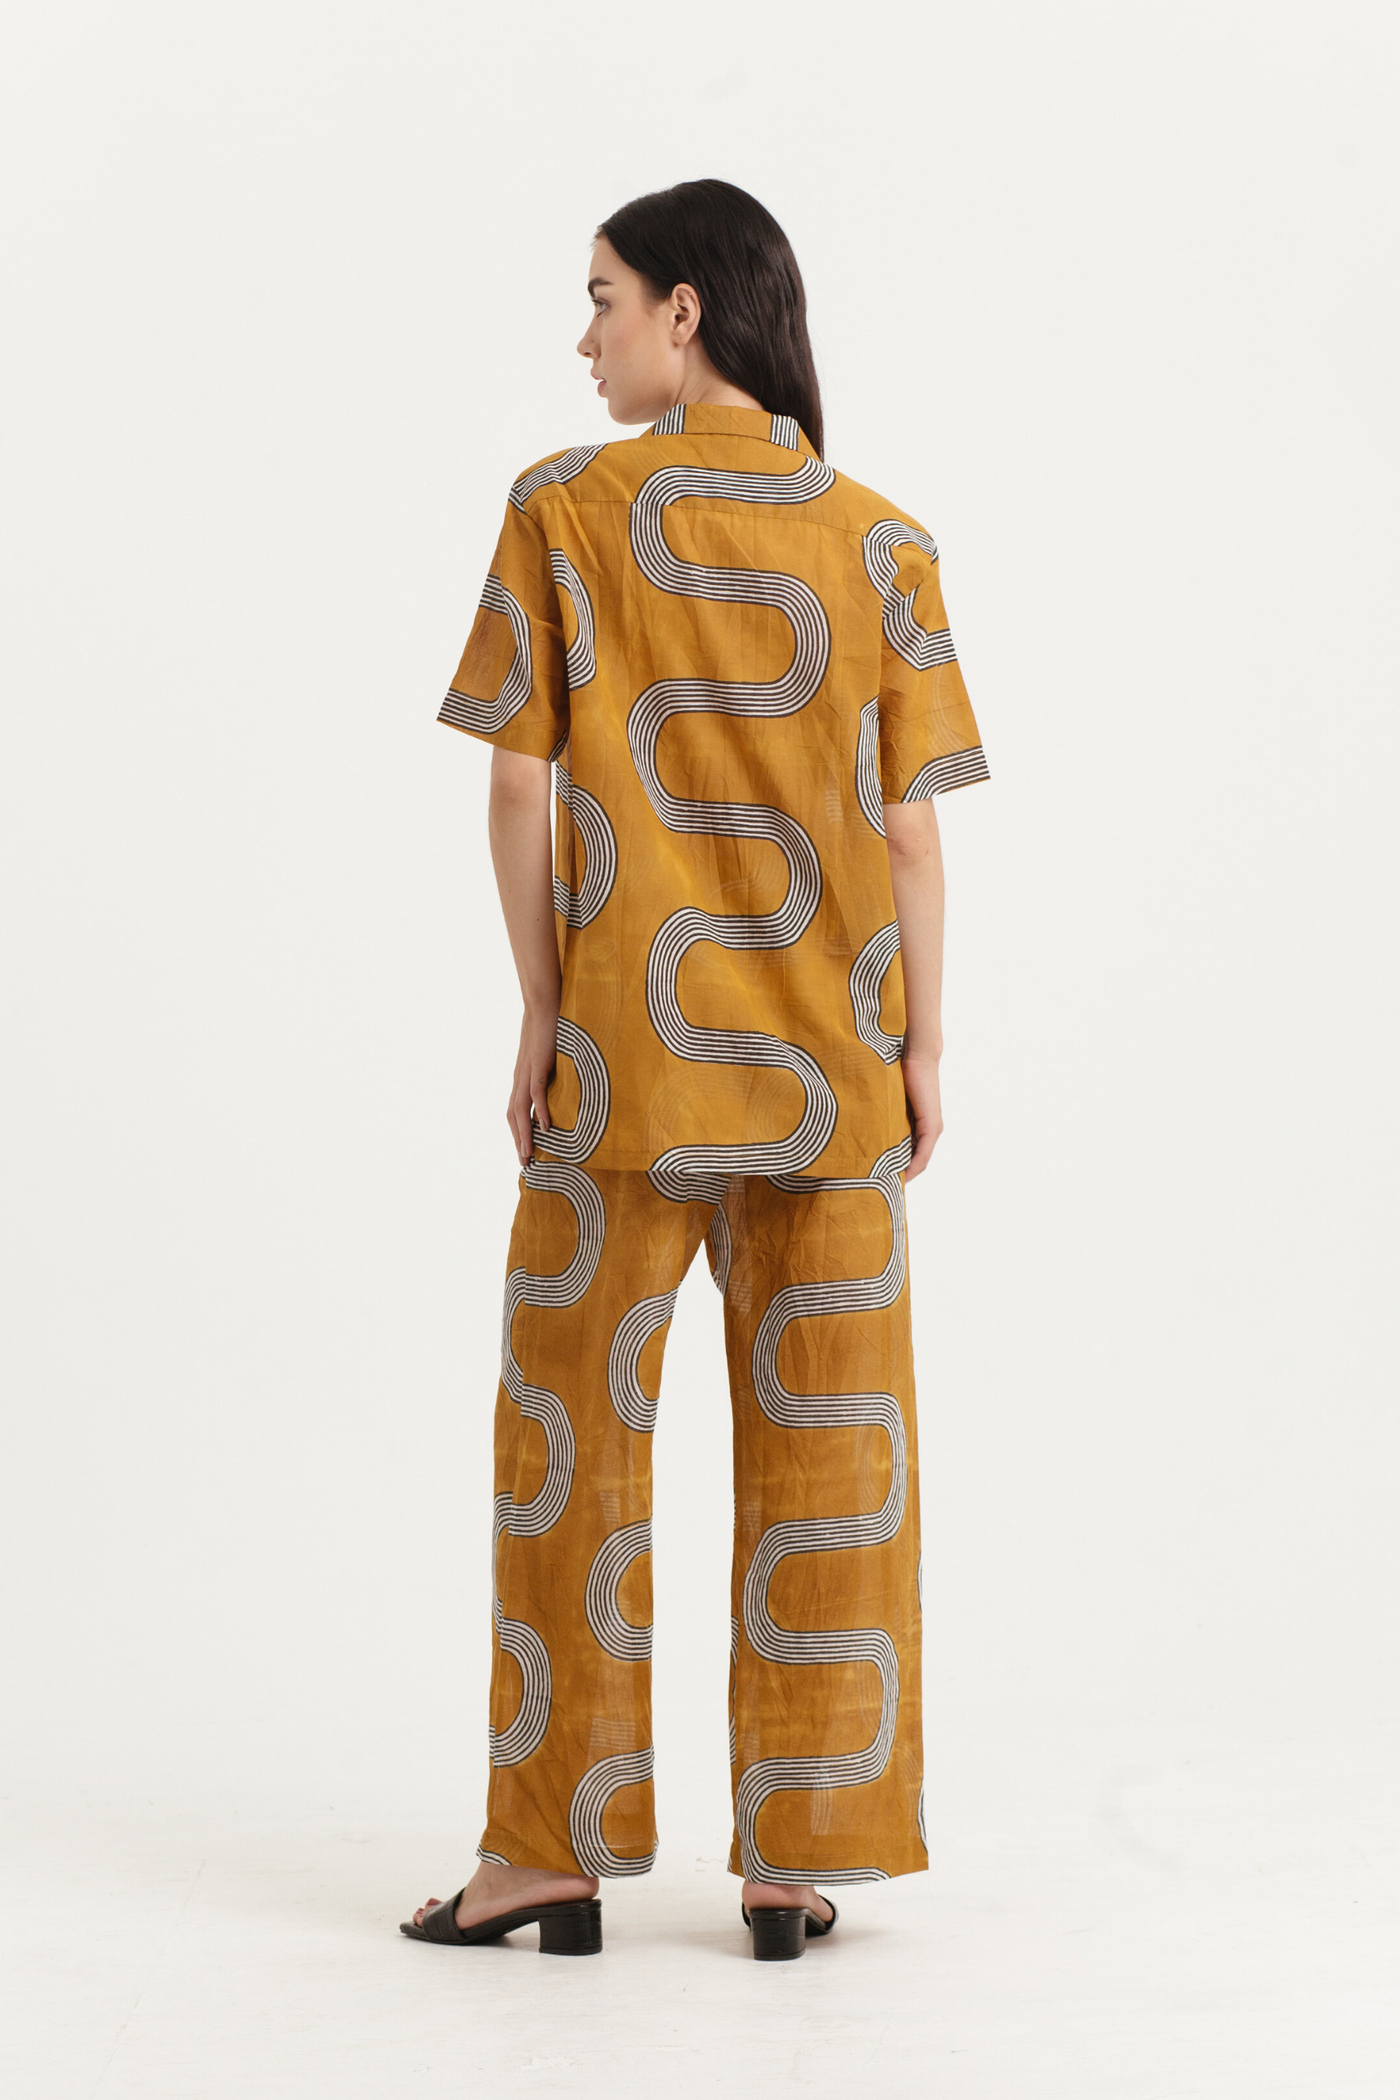 Stain Ringo Shirt in Tigris, available on ZERRIN with free Singapore shipping